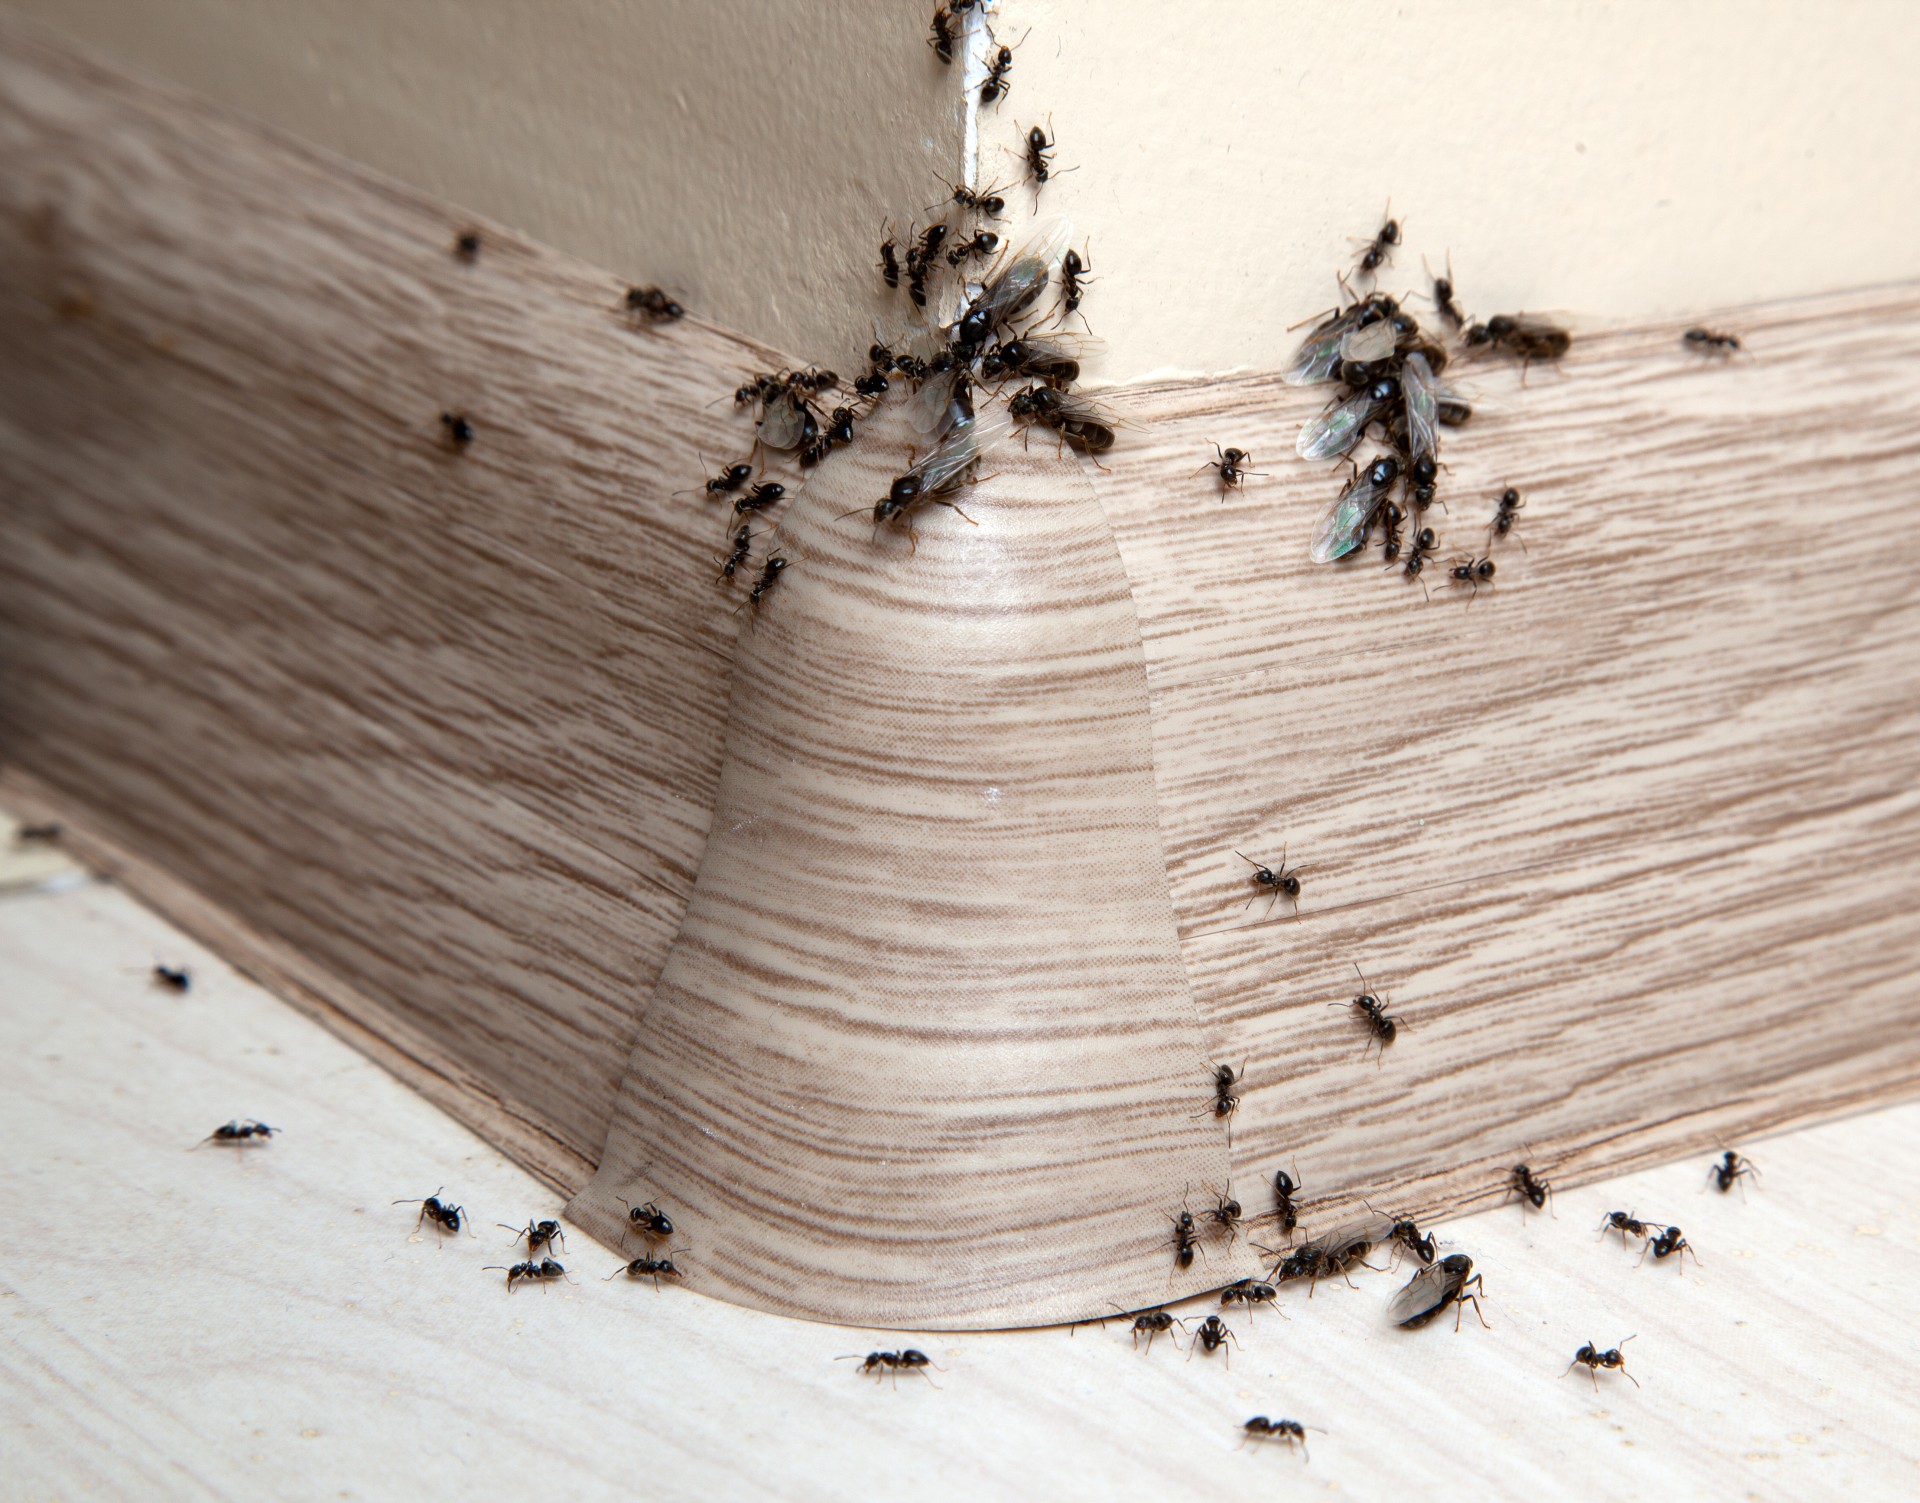 Ant Infestation, Pest Control in Havering-atte-Bower, Abridge, RM4. Call Now 020 8166 9746